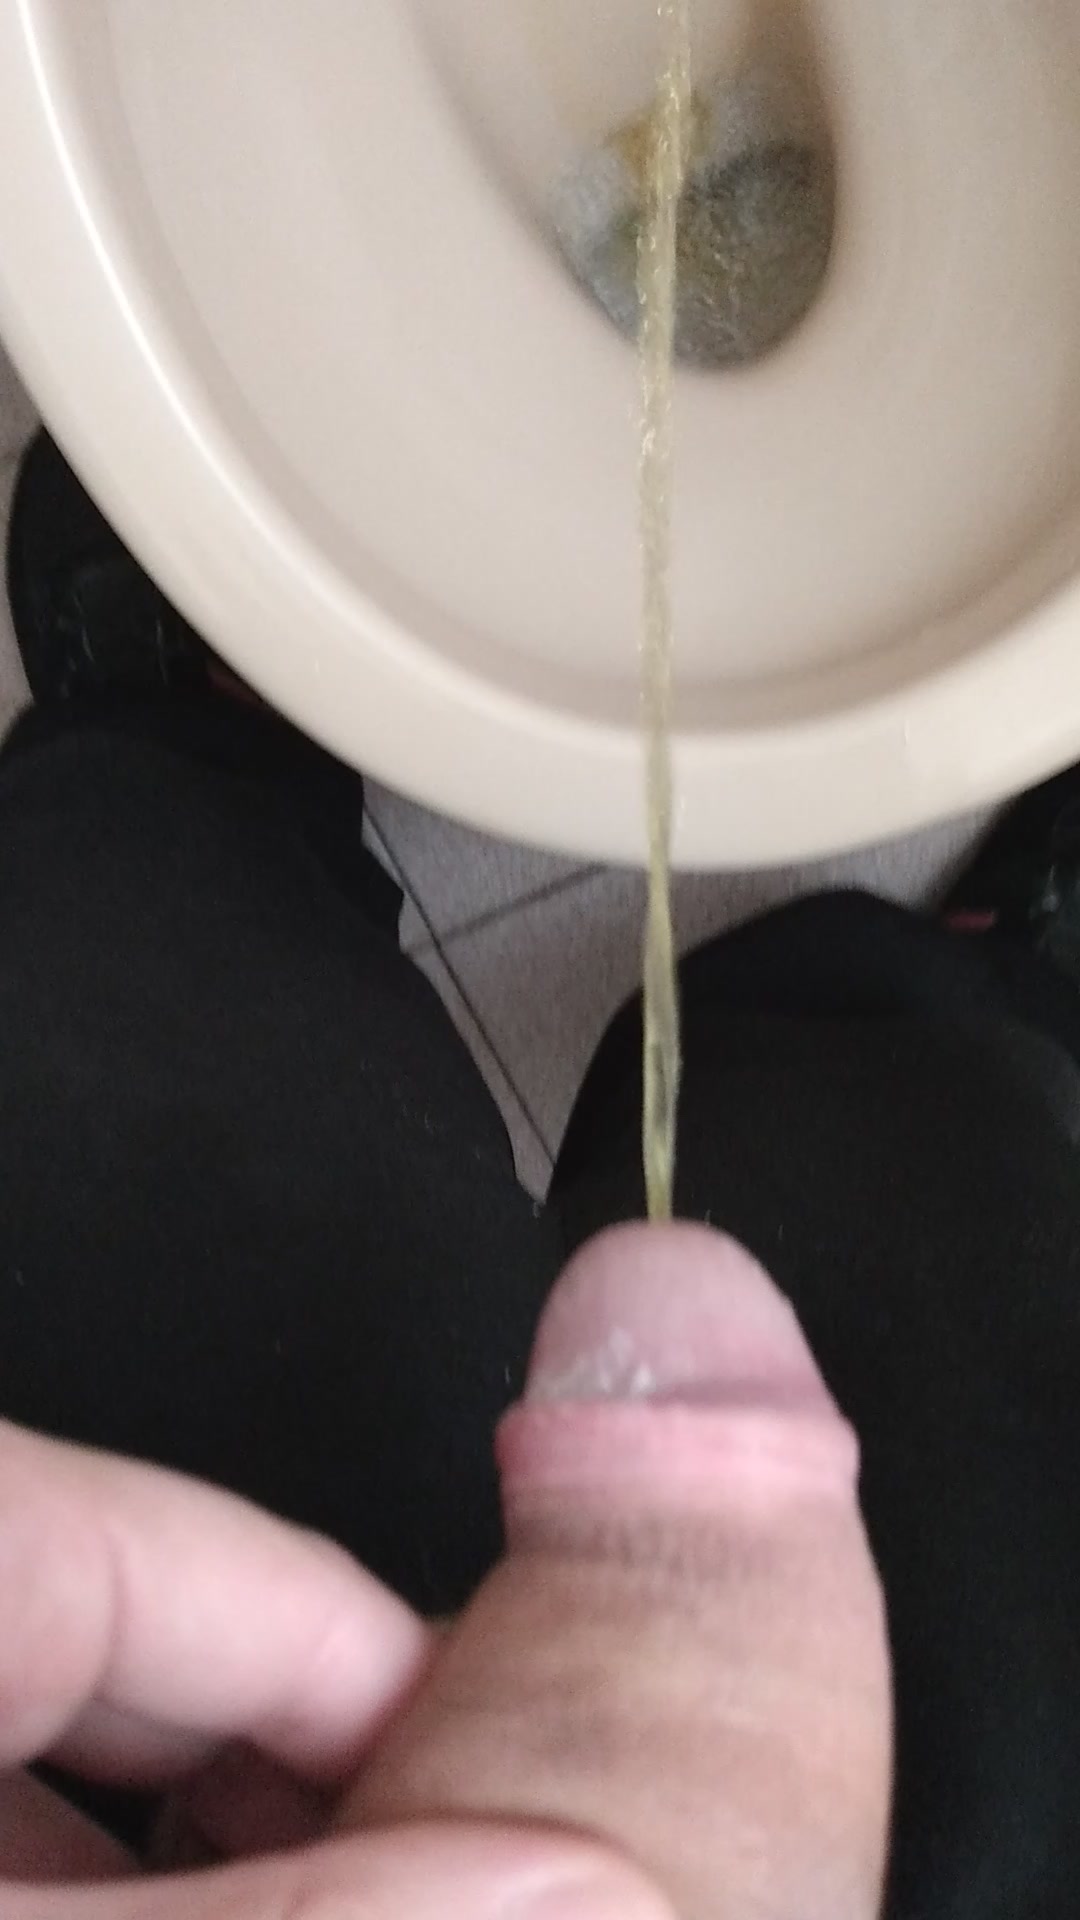 Pissing and stroking my cockhead